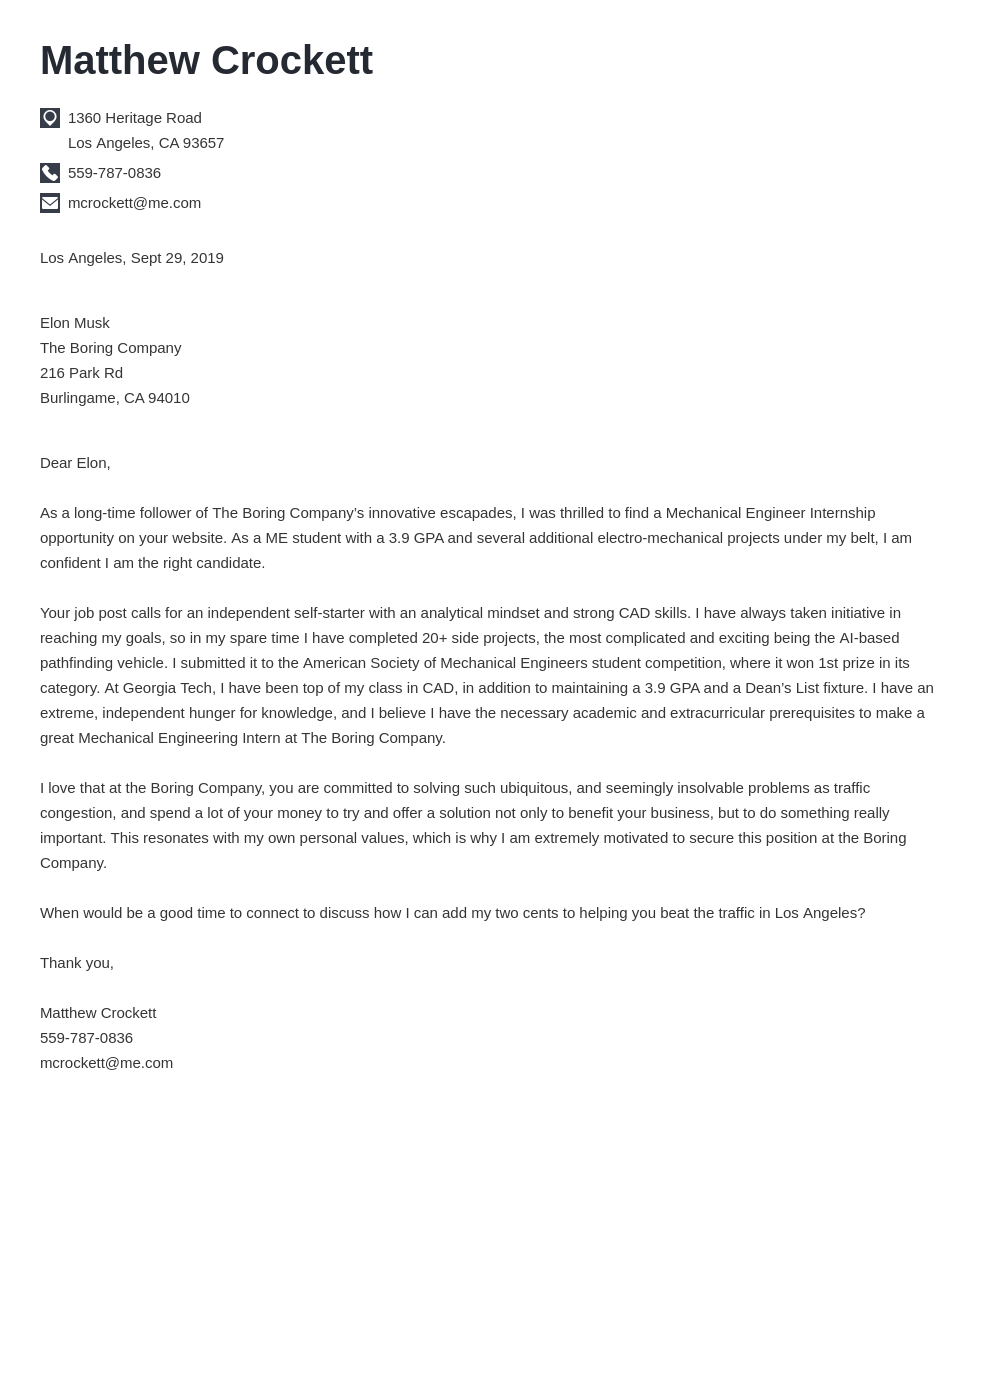 Mechanical Engineer Cover Letter: Examples & Templates to Fill